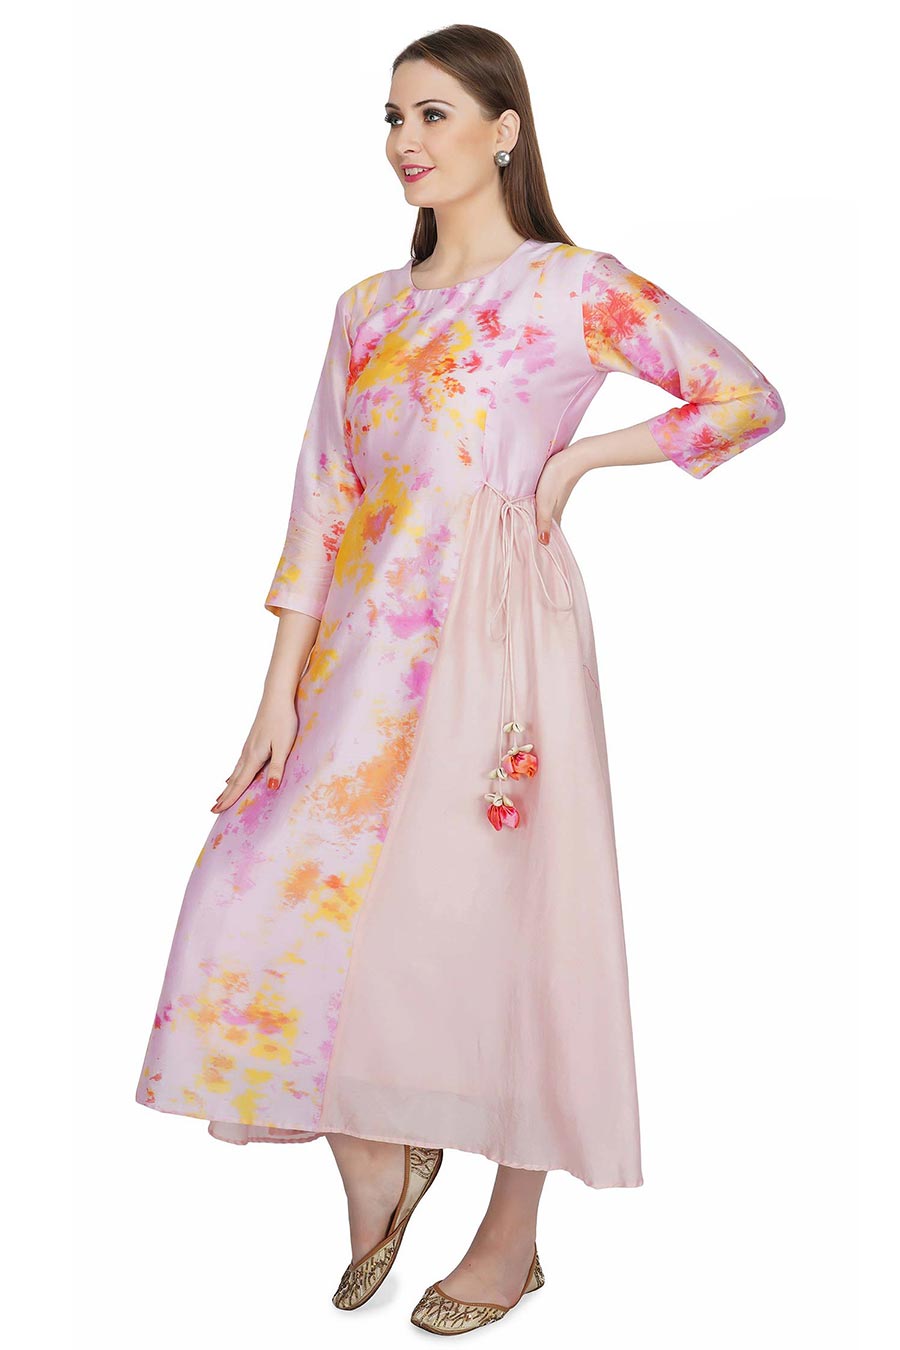 Marble Dyed Pink Panel Dress